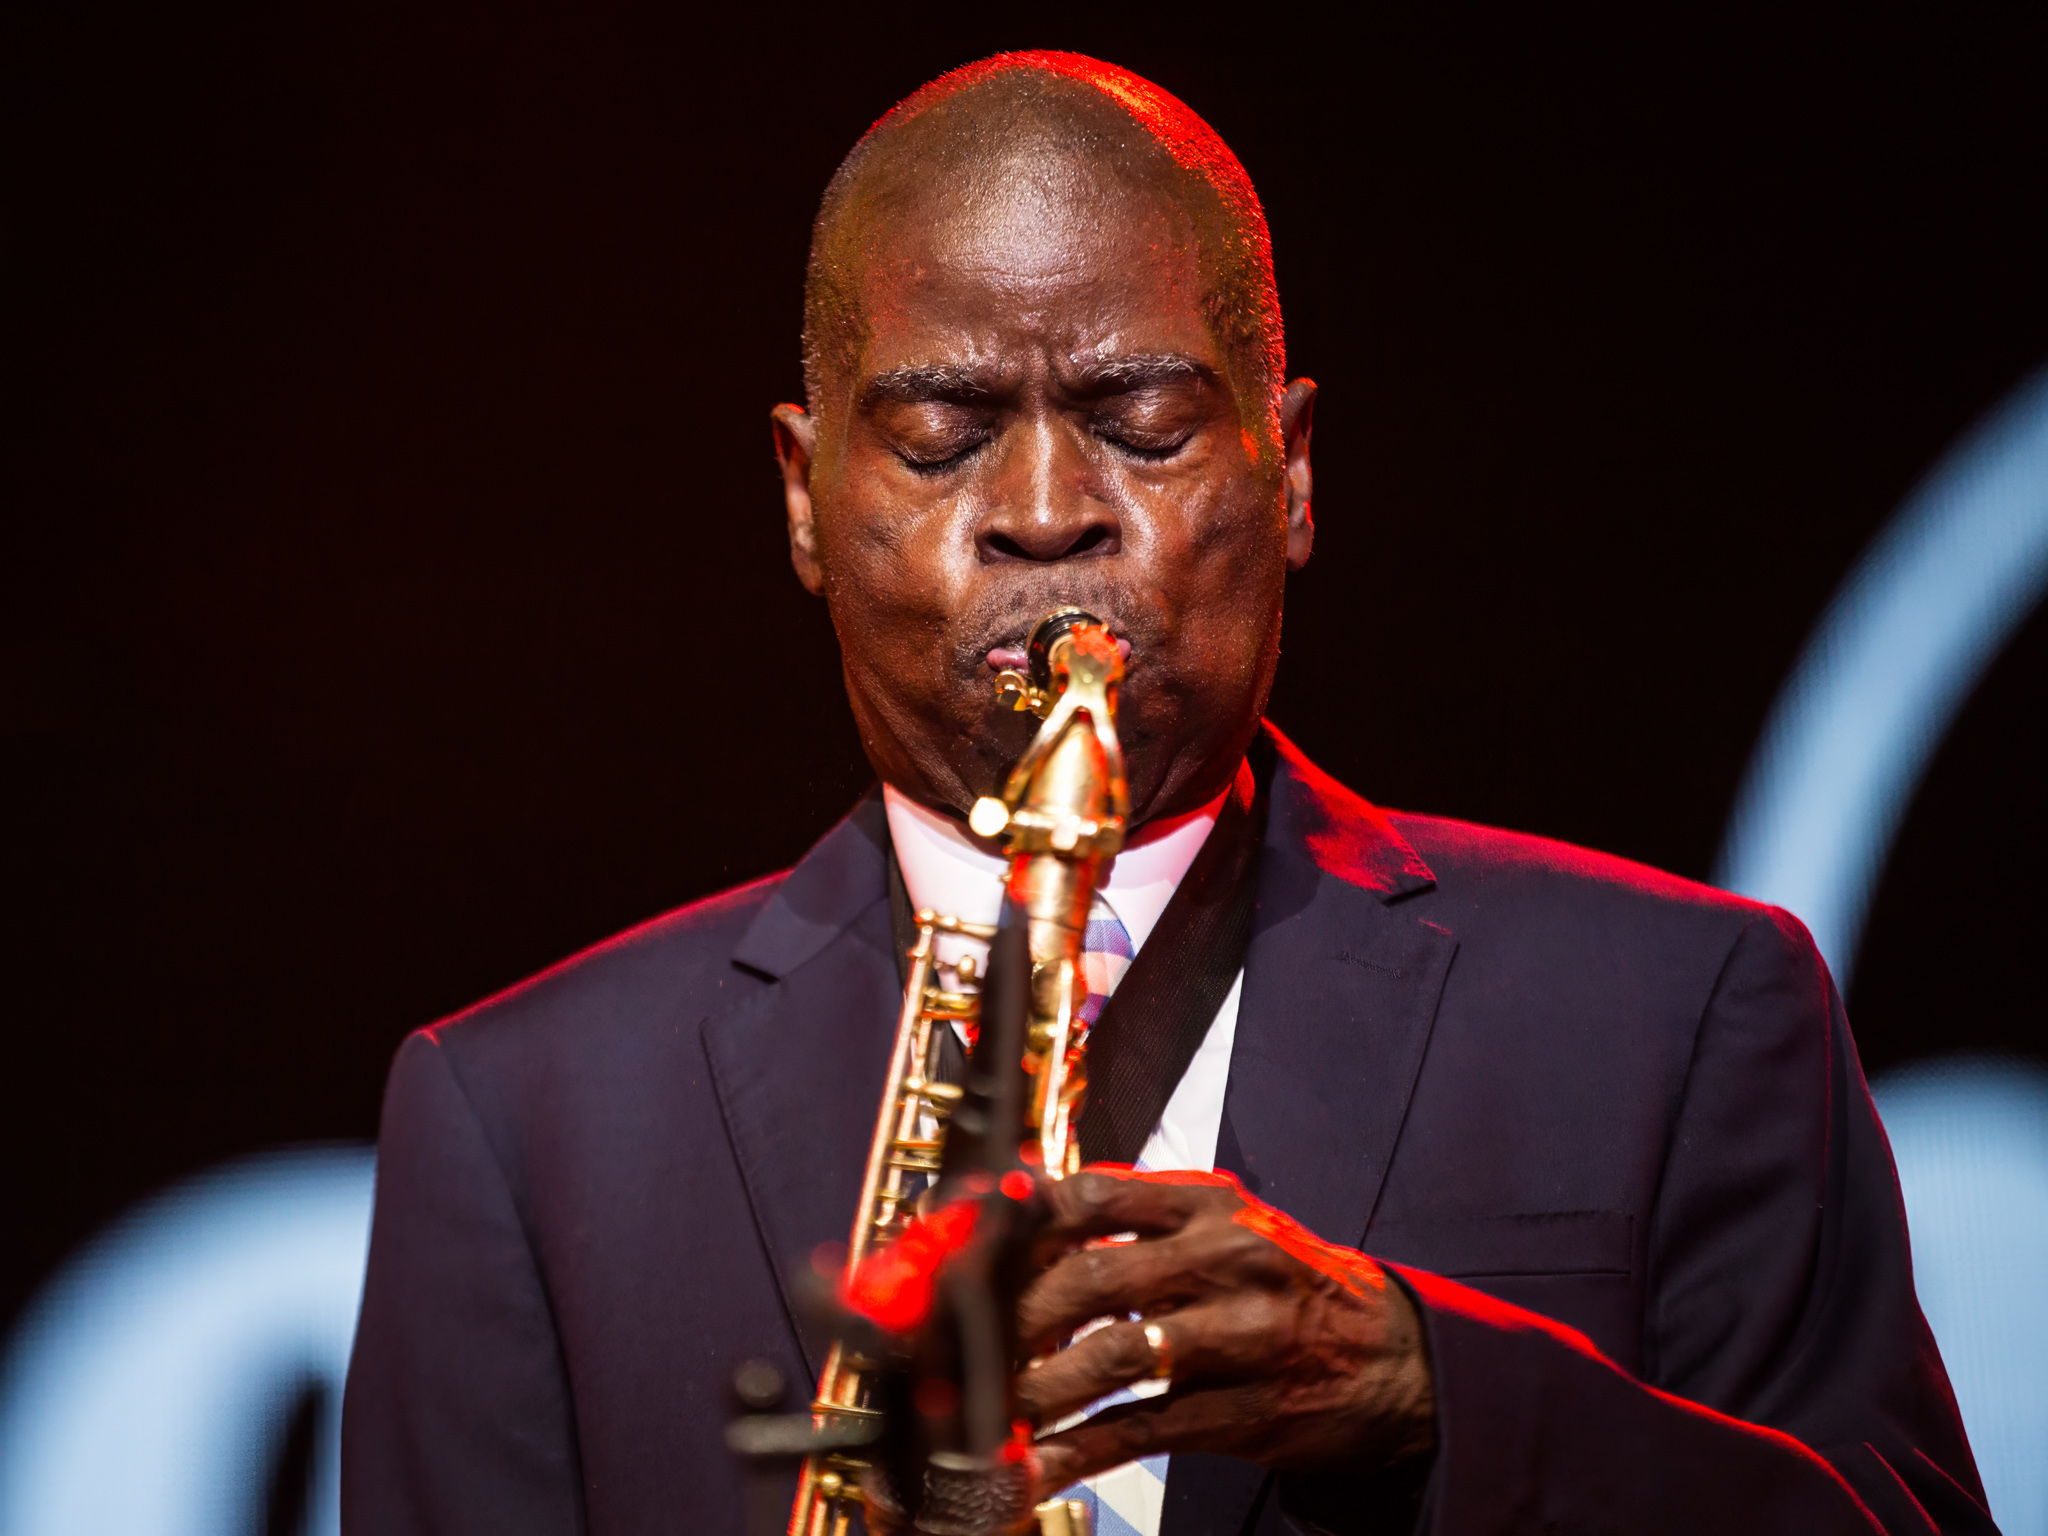 Maceo Parker by Bullet-ray Photography